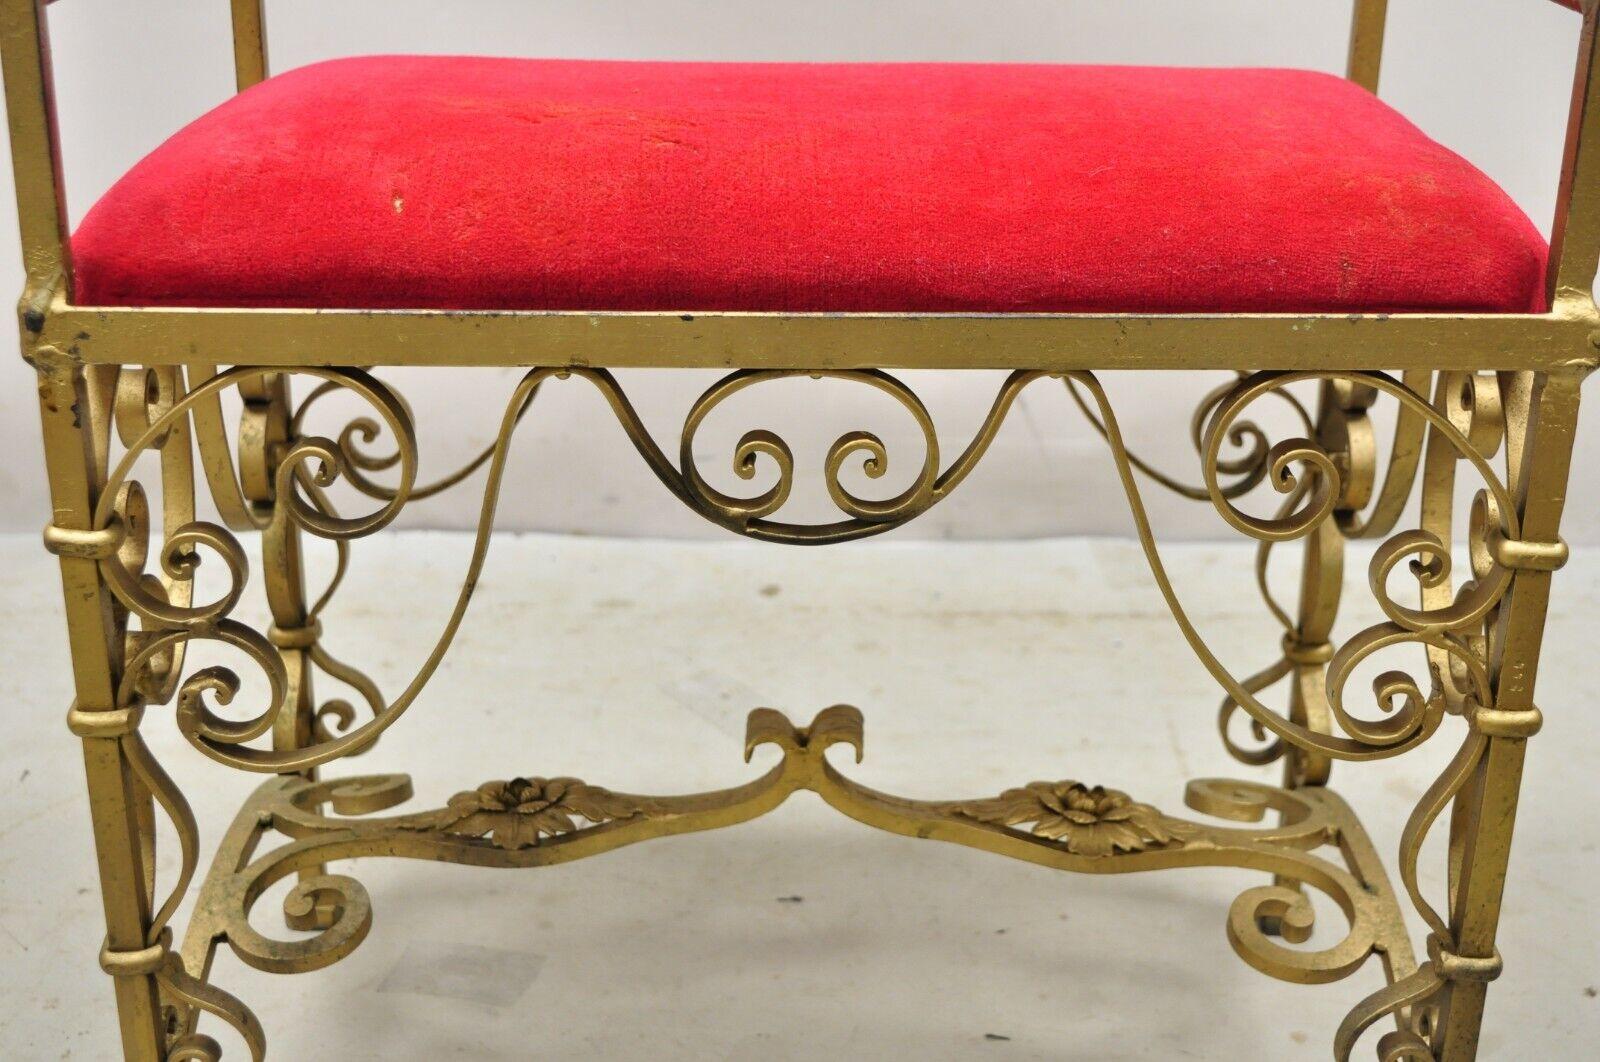 Vintage Gold Hollywood Regency Gothic Iron Scrolling Vanity Bench Seat Stool For Sale 3